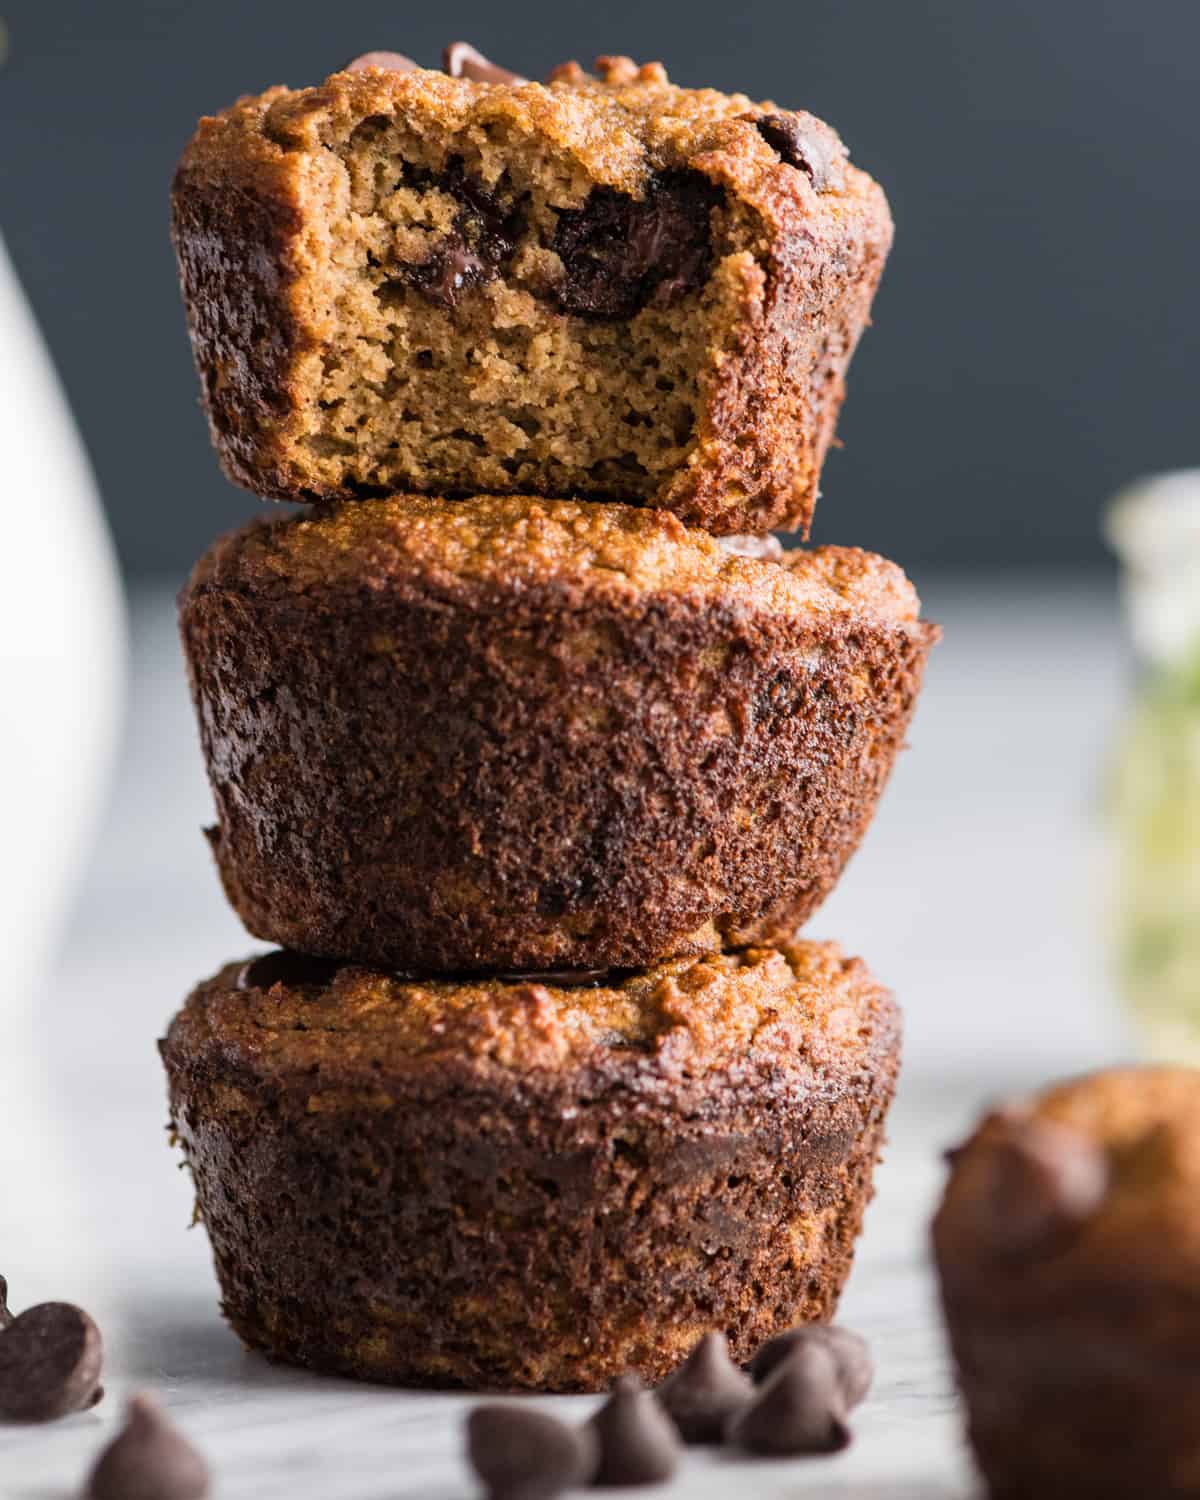 stack of 3 paleo zucchini muffins - the top one has a bite taken out of it 